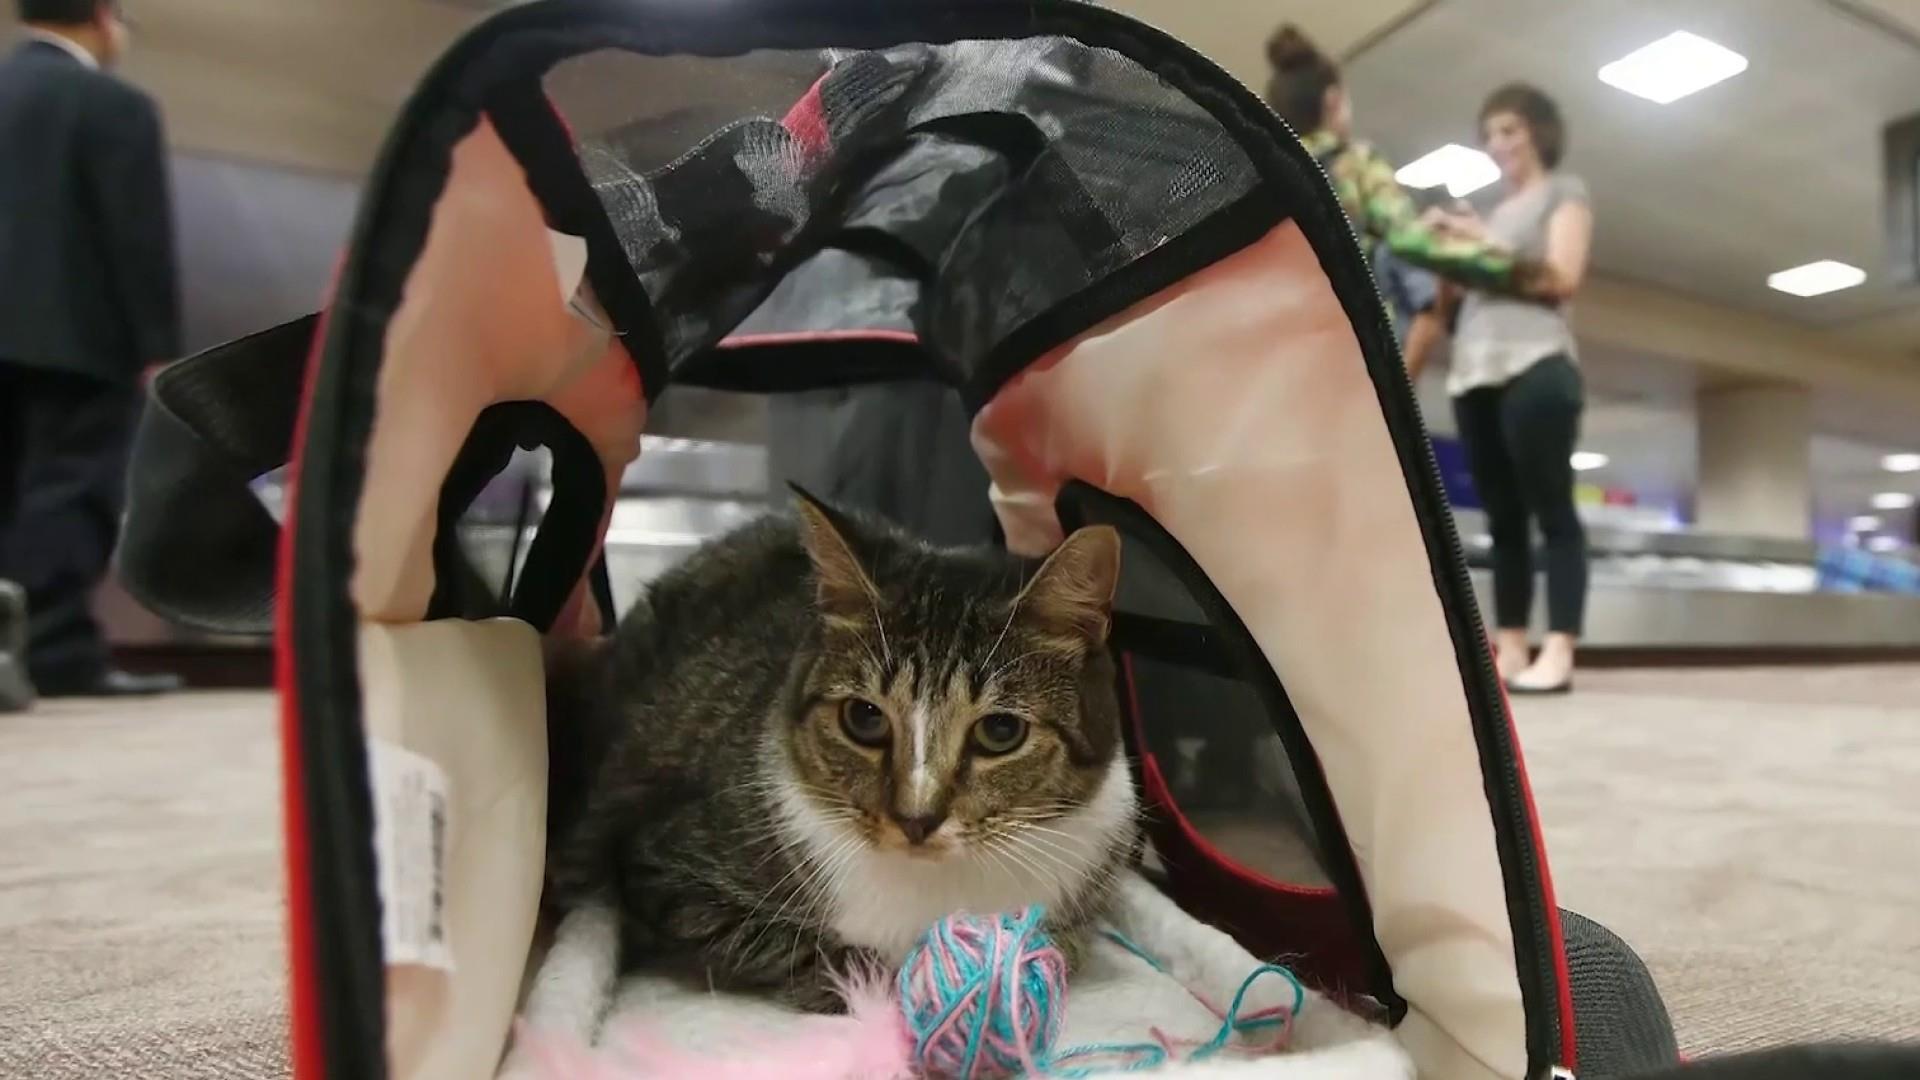 Pet owners on airlines making it harder to travel with emotional support  animals